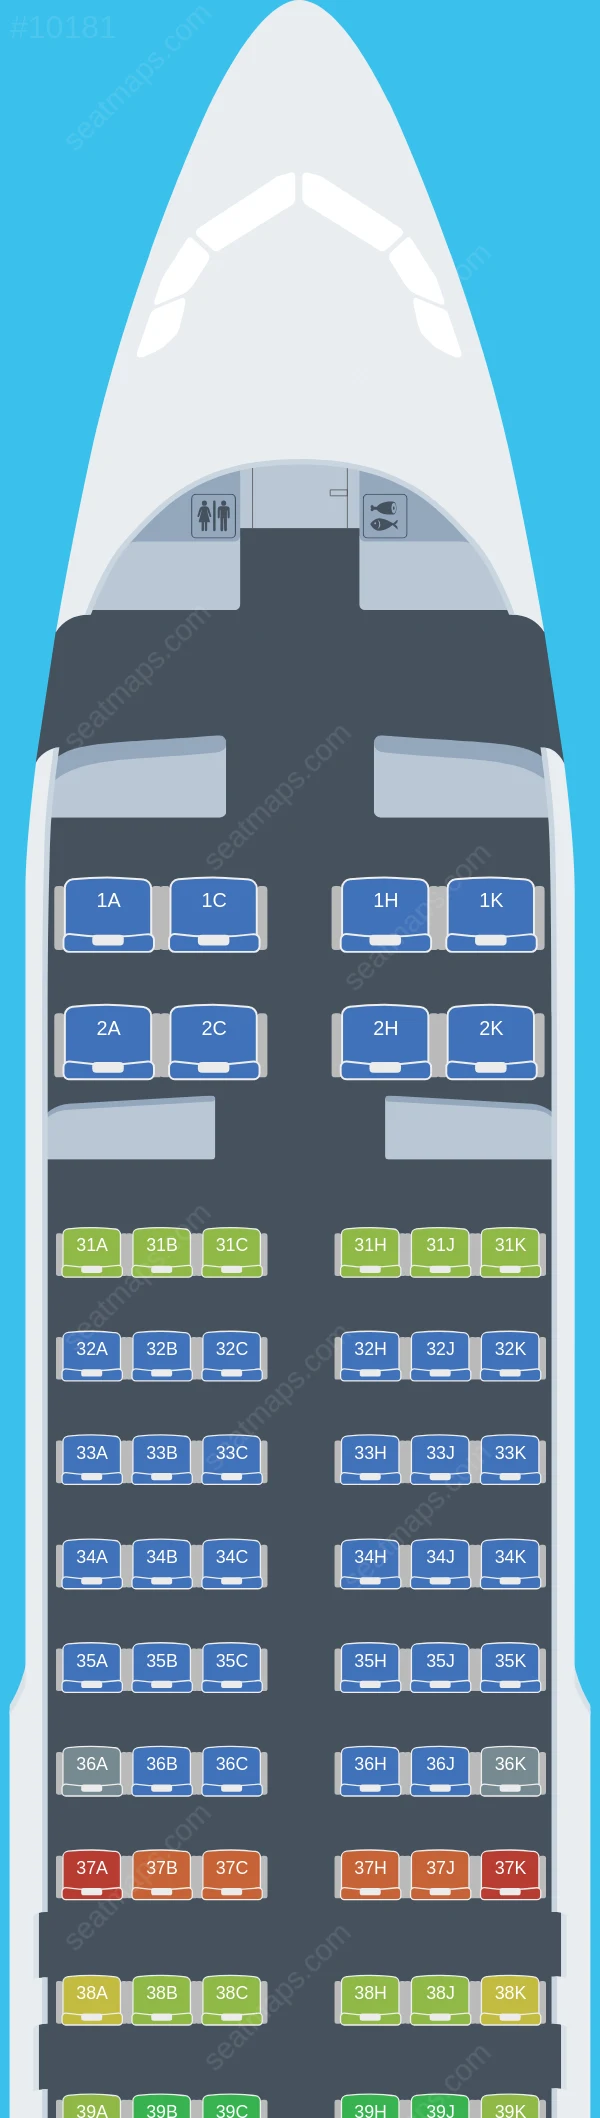 Juneyao Air Airbus A320neo seatmap preview